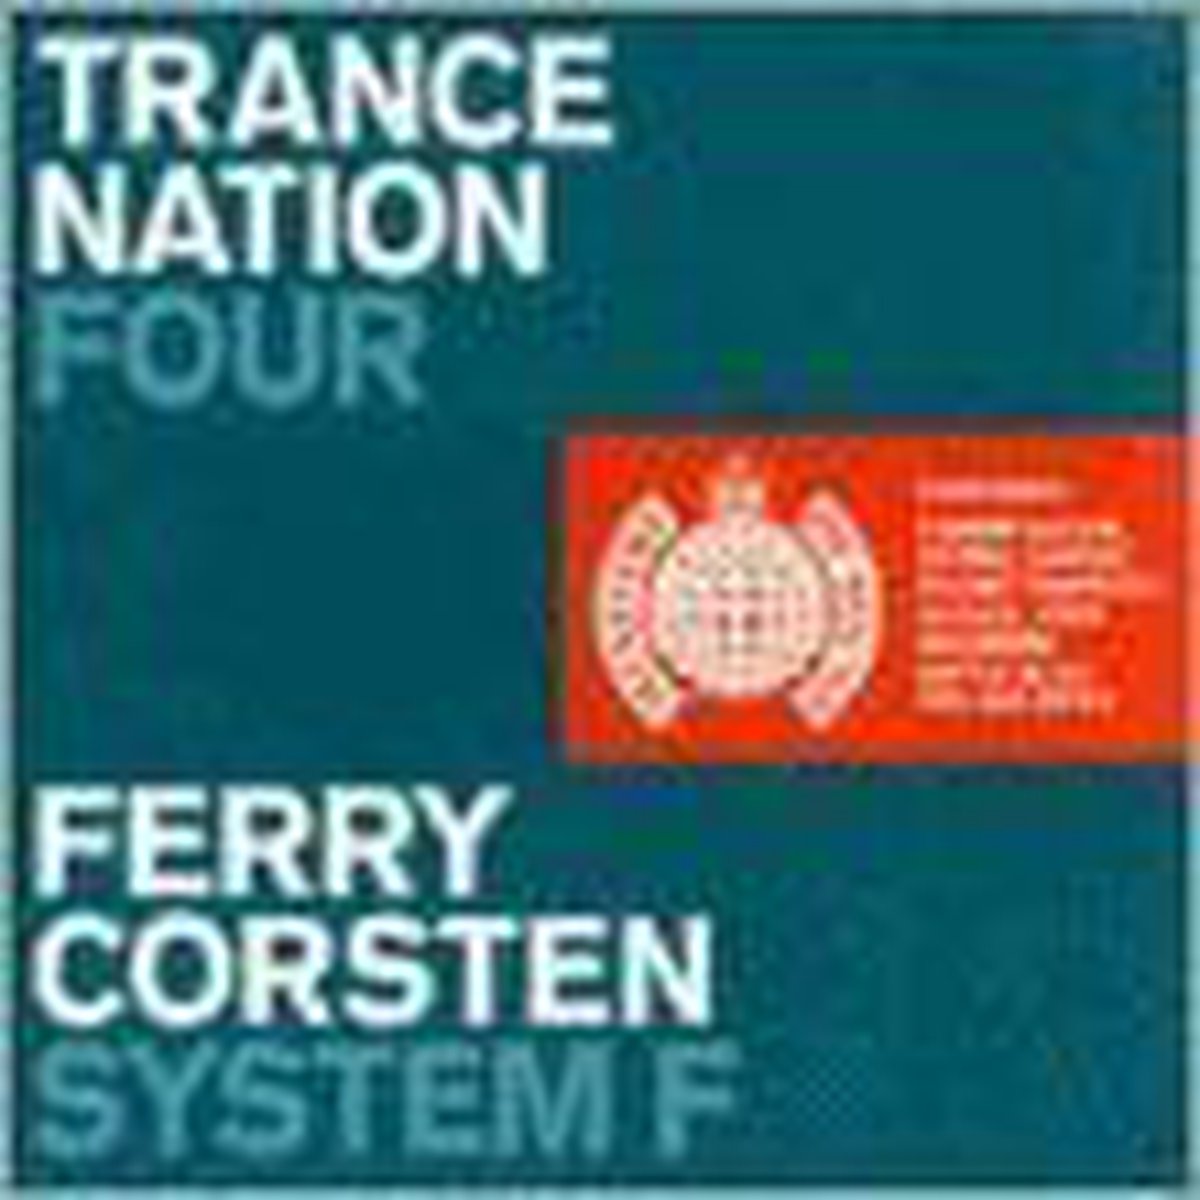 Trance Nation, Vol. 4 (Mixed By Ferry Corsten) - various artists